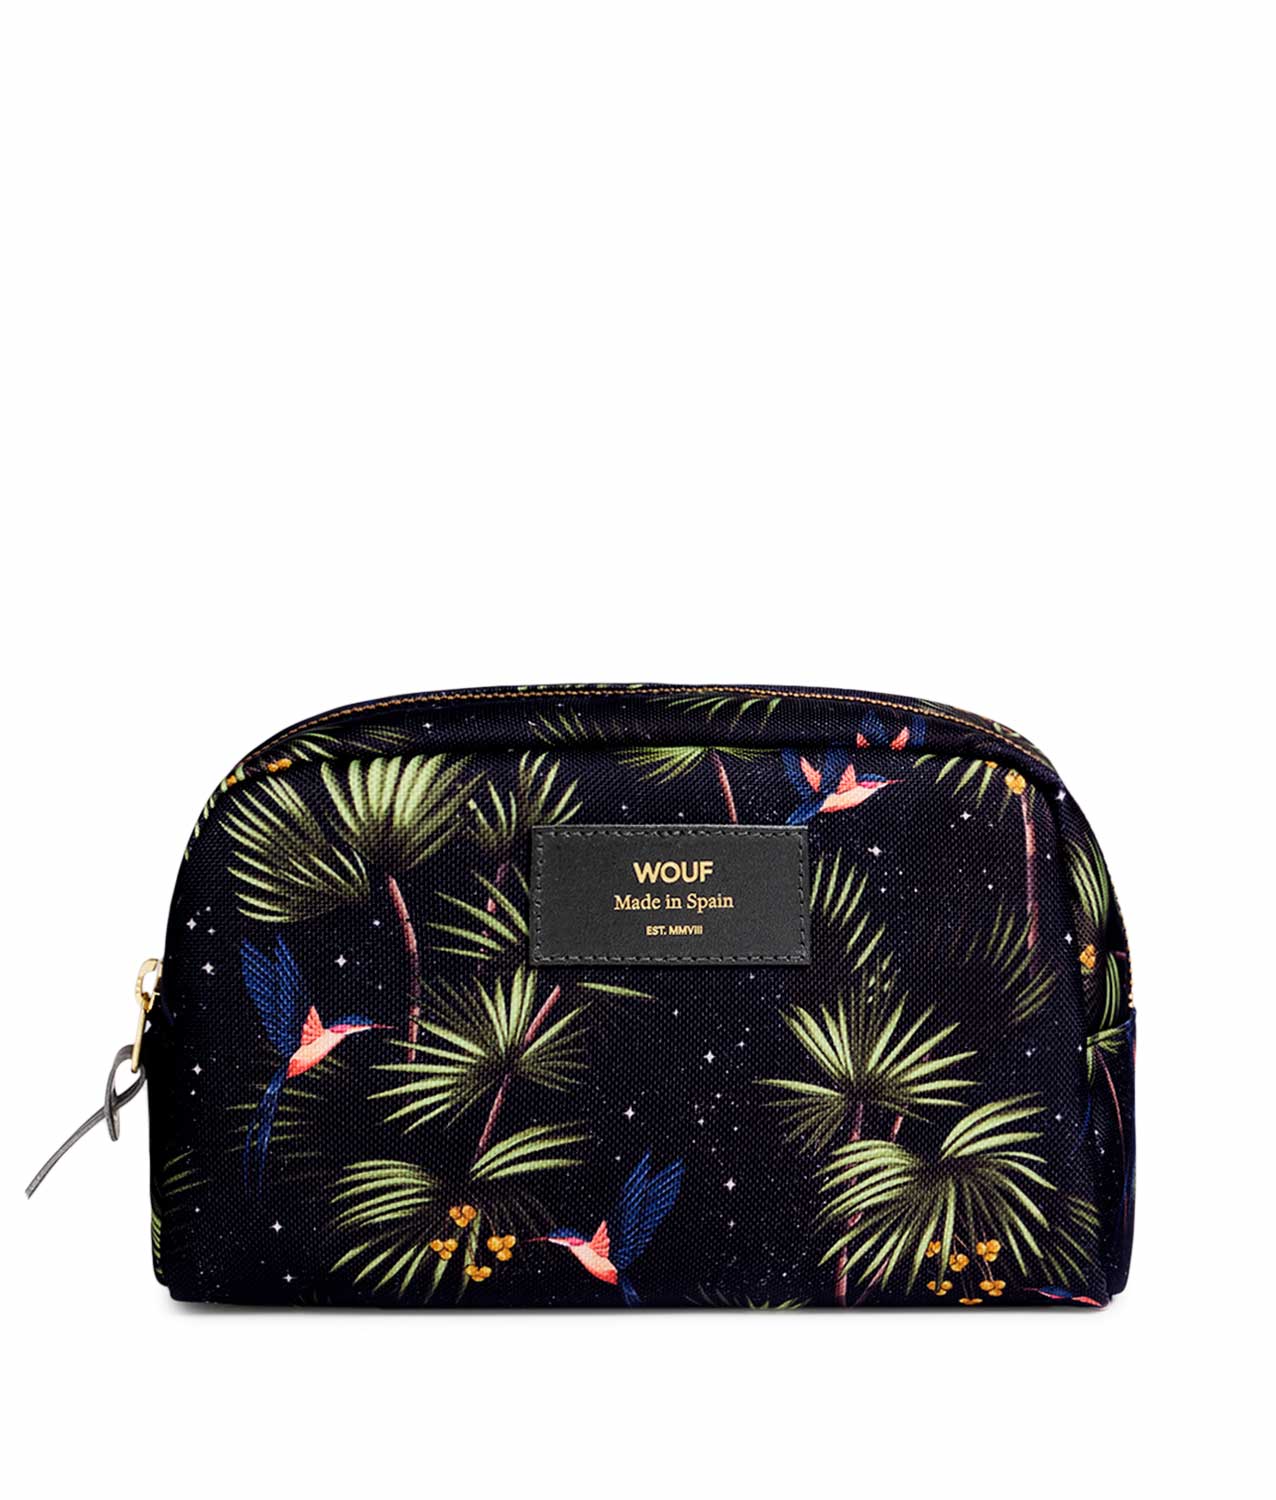 wouf-paradise-toiletry-bag-1